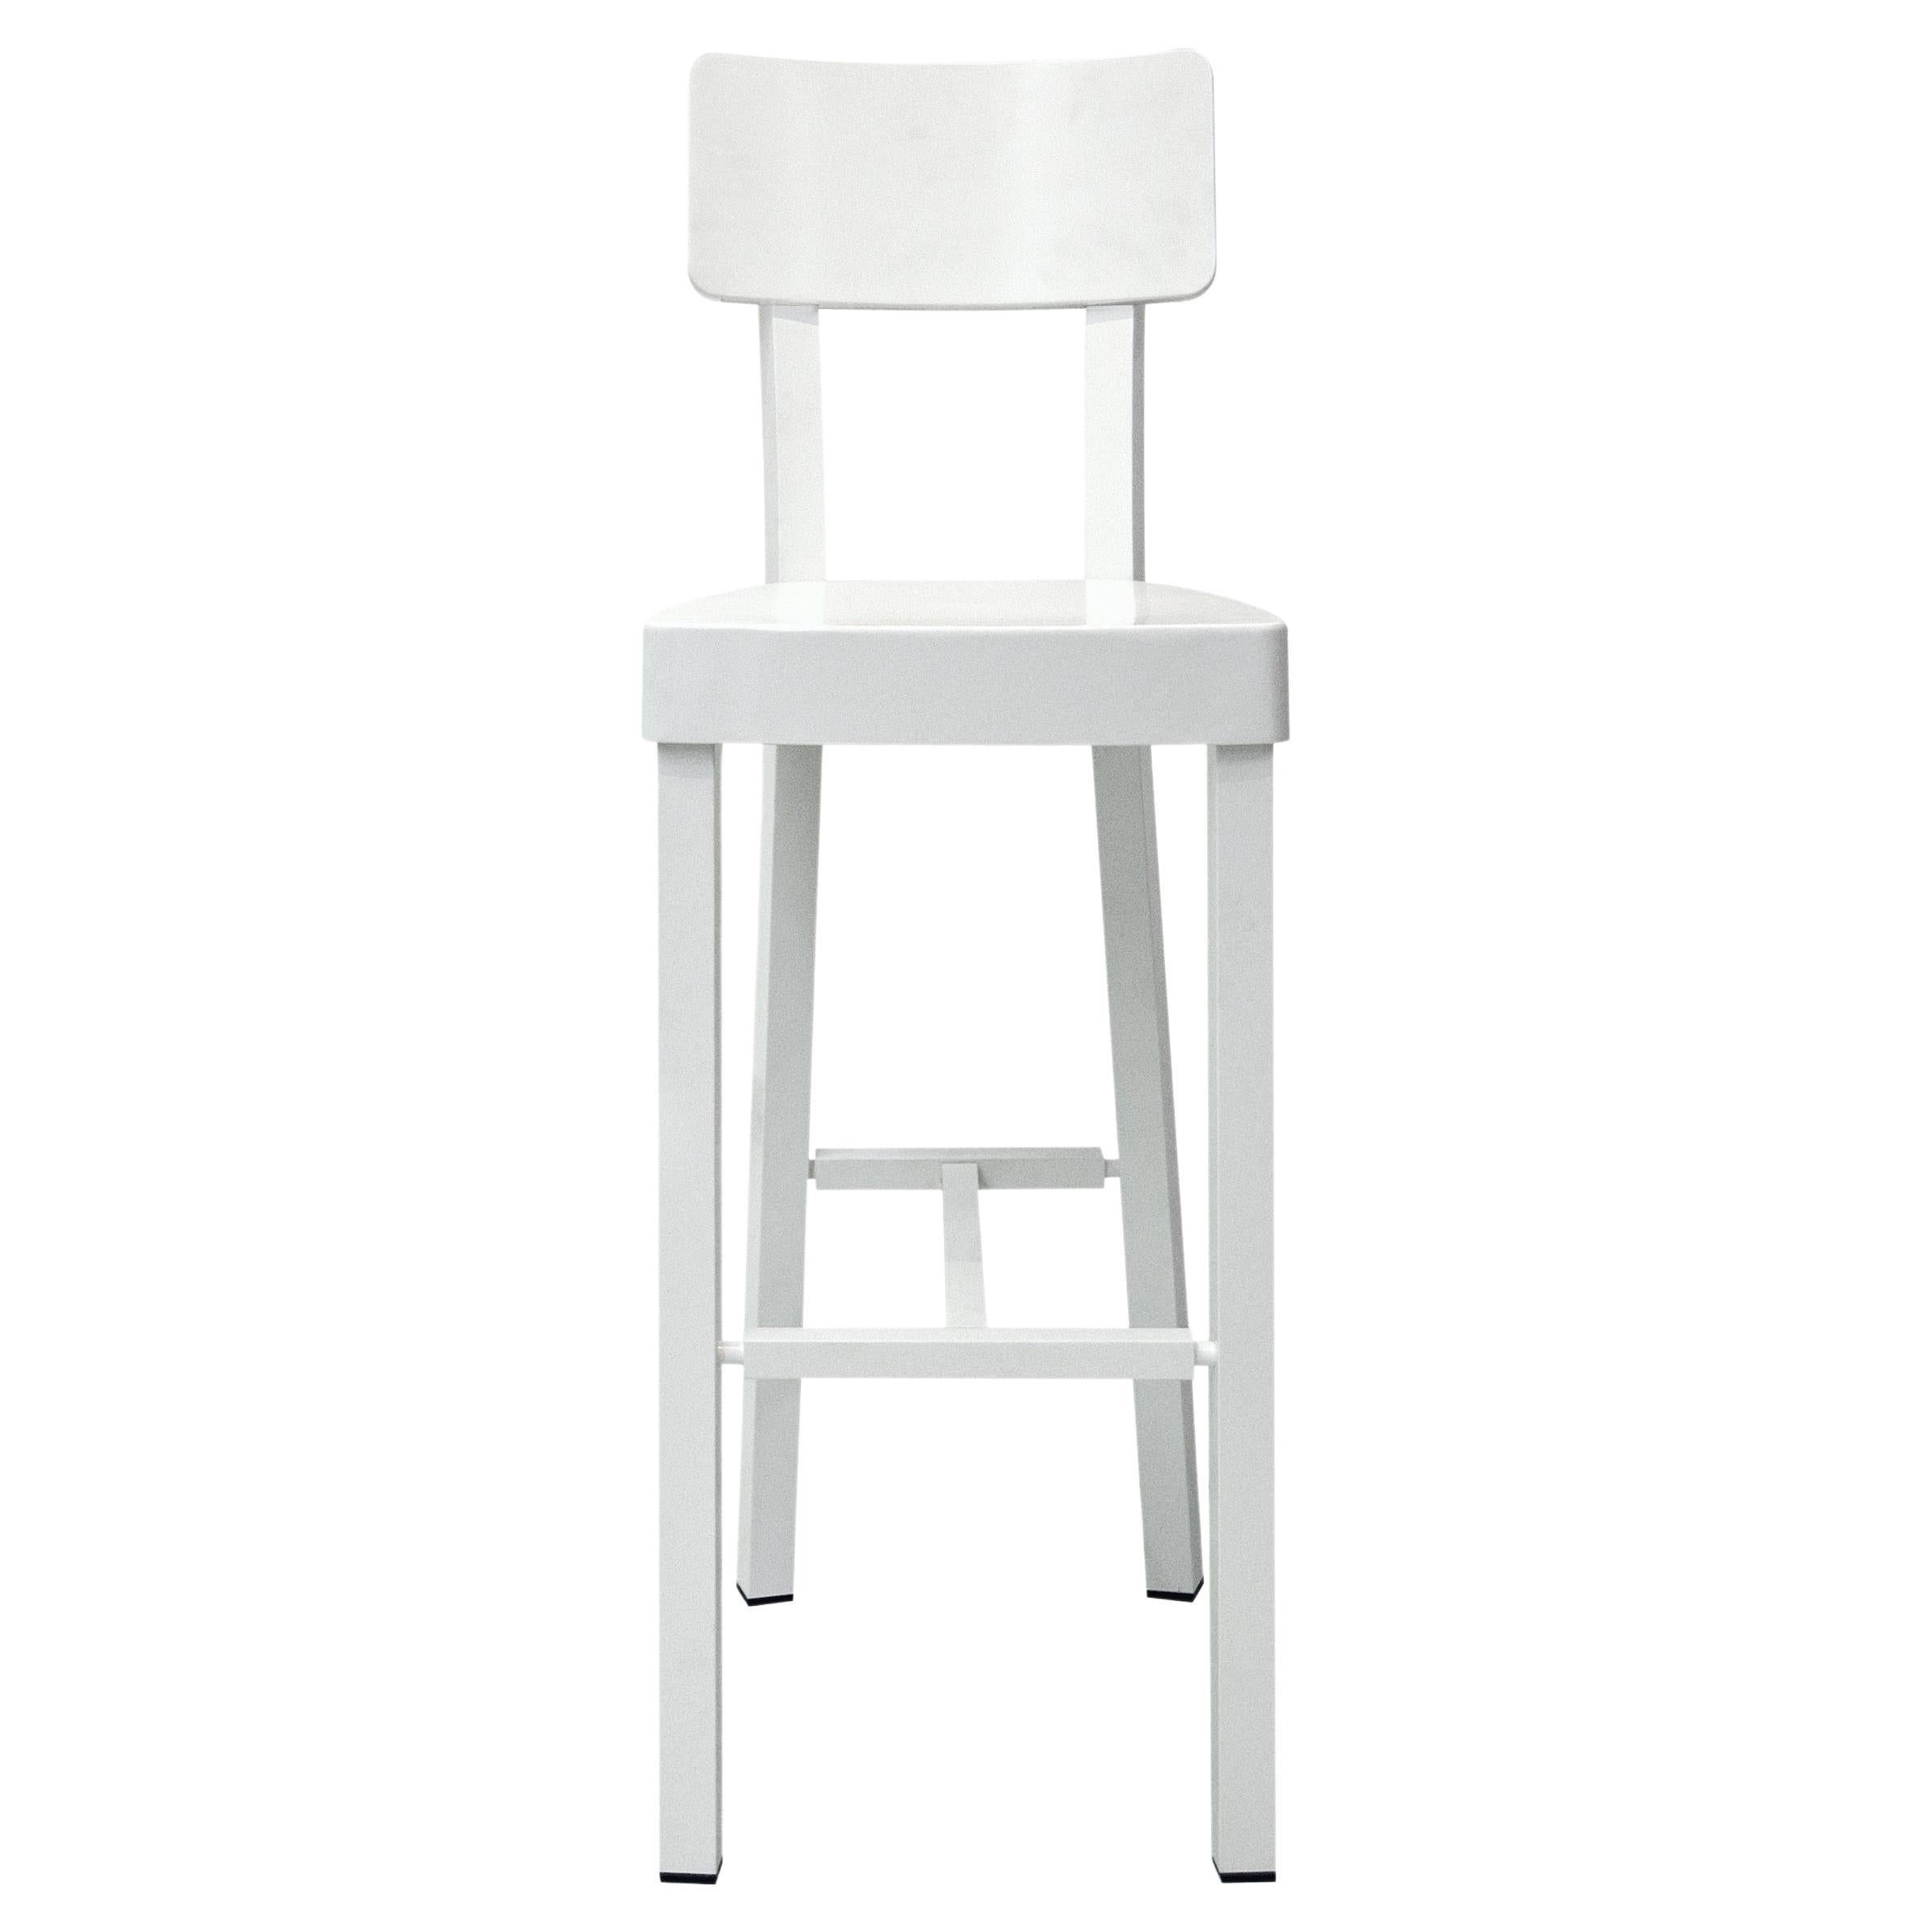 Gervasoni Inout 28 Barstool in Glossy White Lacquered Aluminum by Paola Navone For Sale